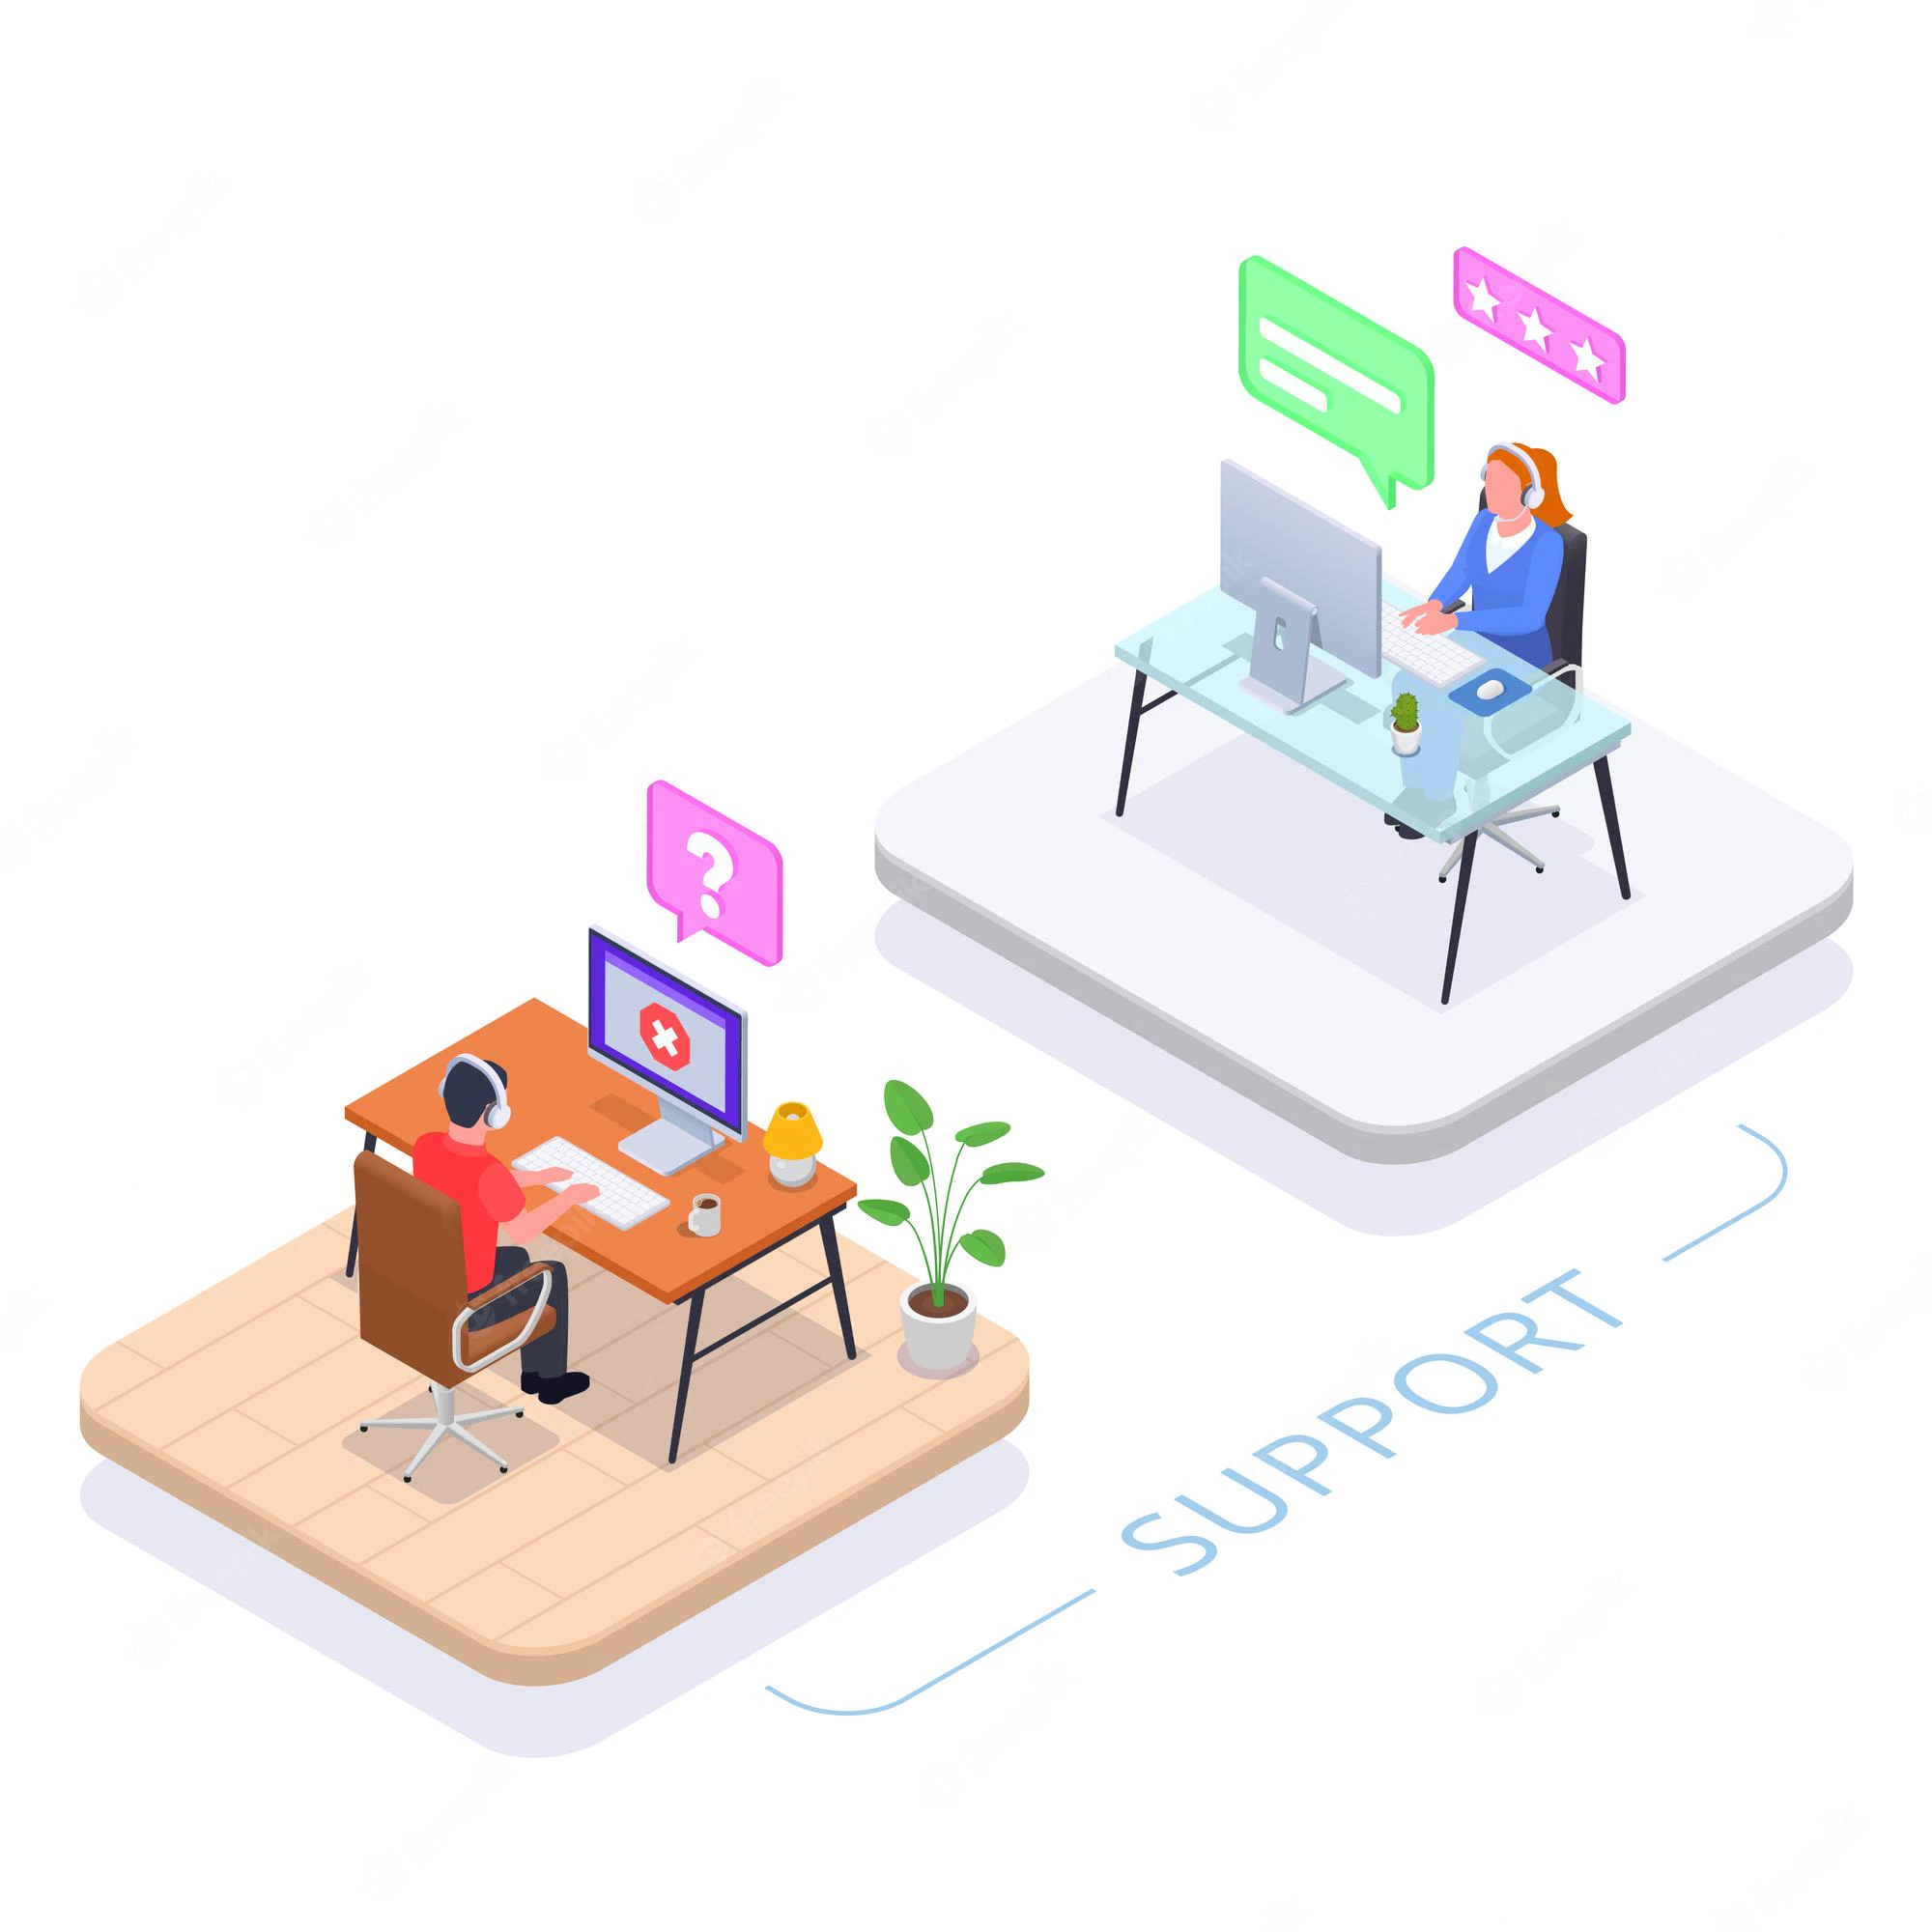 https://backoffice.uiii.ac.id/storage/image/call-center-helpdesk-concept-with-support-symbols-isometric-vector-illustration_1284-69102 (1) - 20230619131445.jpeg